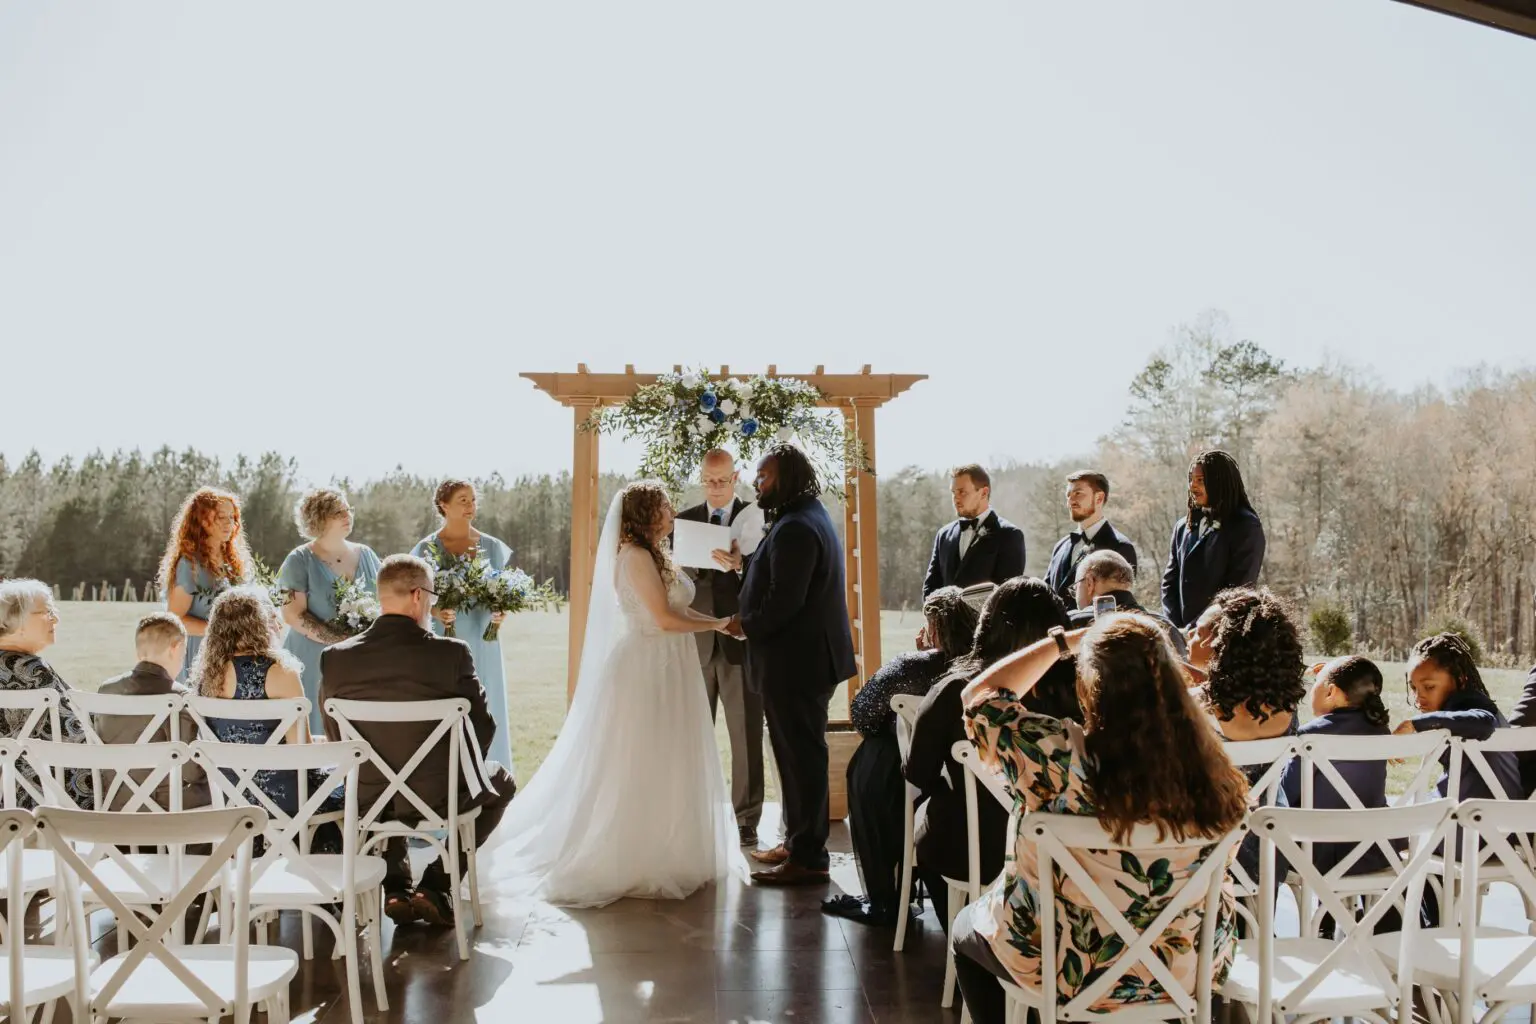 A couple getting married in front of their guests.